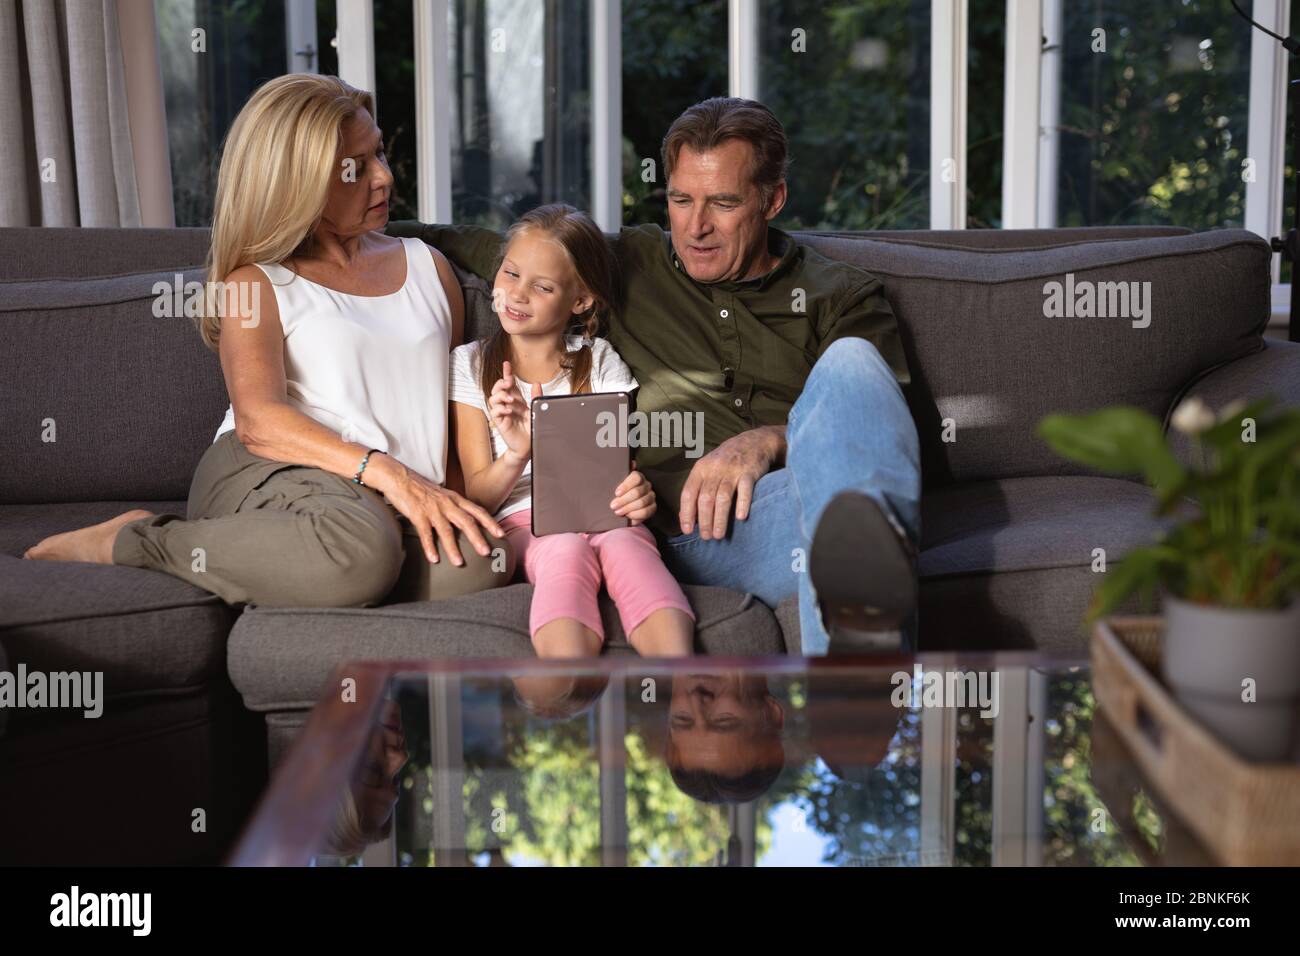 Portrait of a Caucasian girl and her grandparent using a digital tablet on a couch Stock Photo